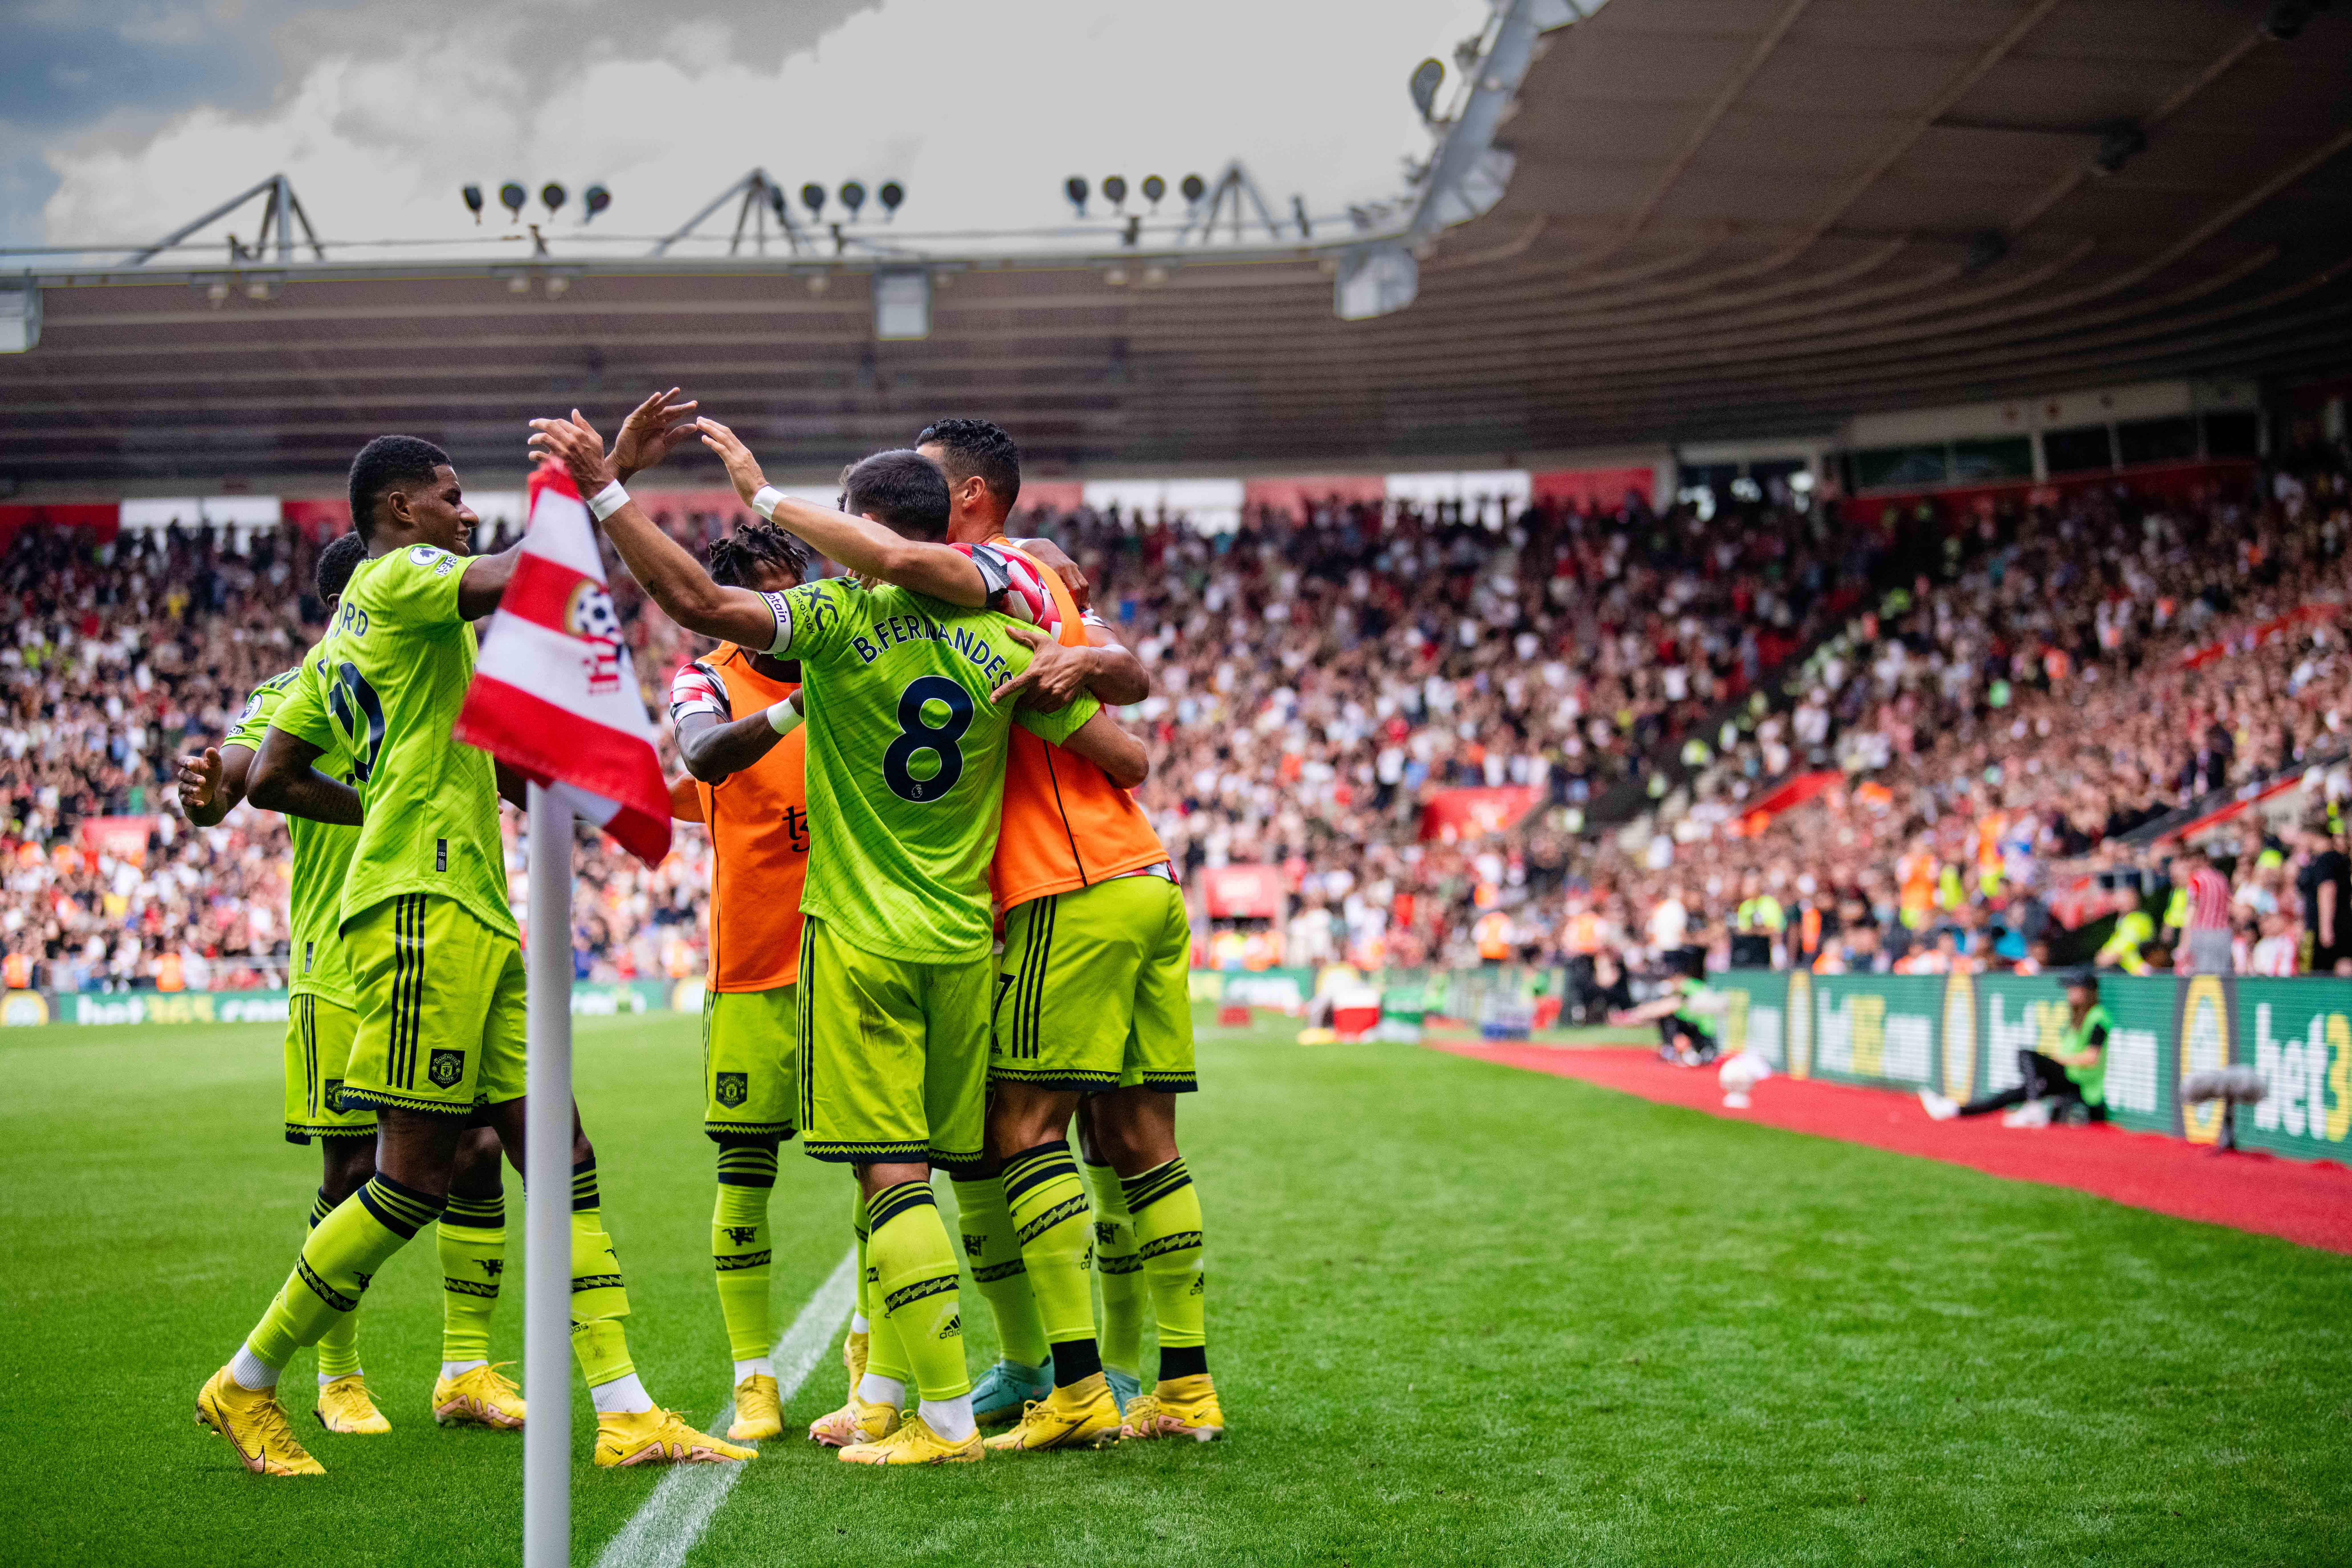 The visitors celebrate their goal at St Mary’s